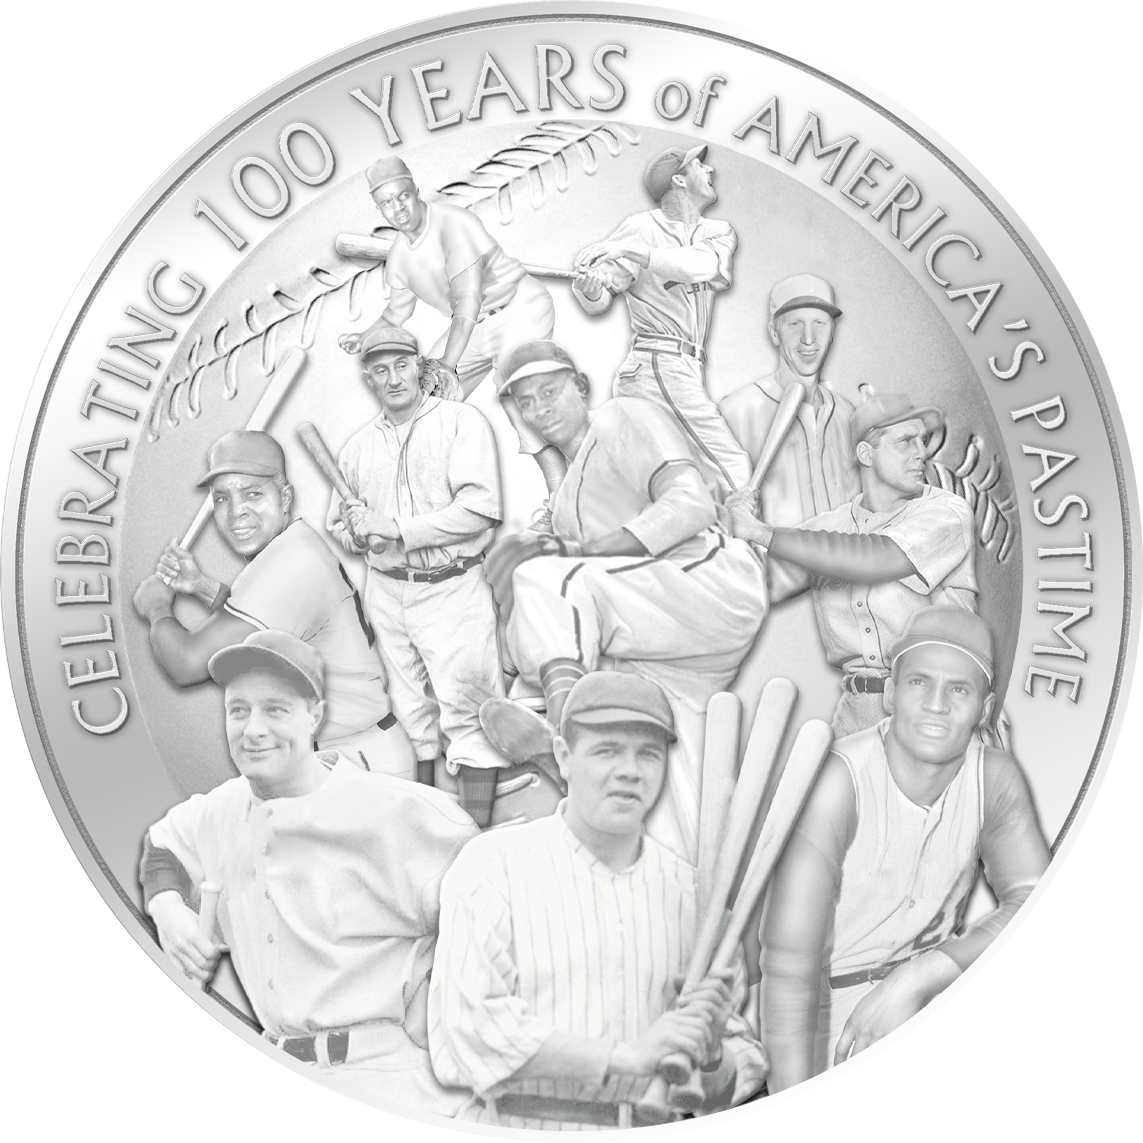 APBPA 100 Anniversary Collectors Edition Coin Front